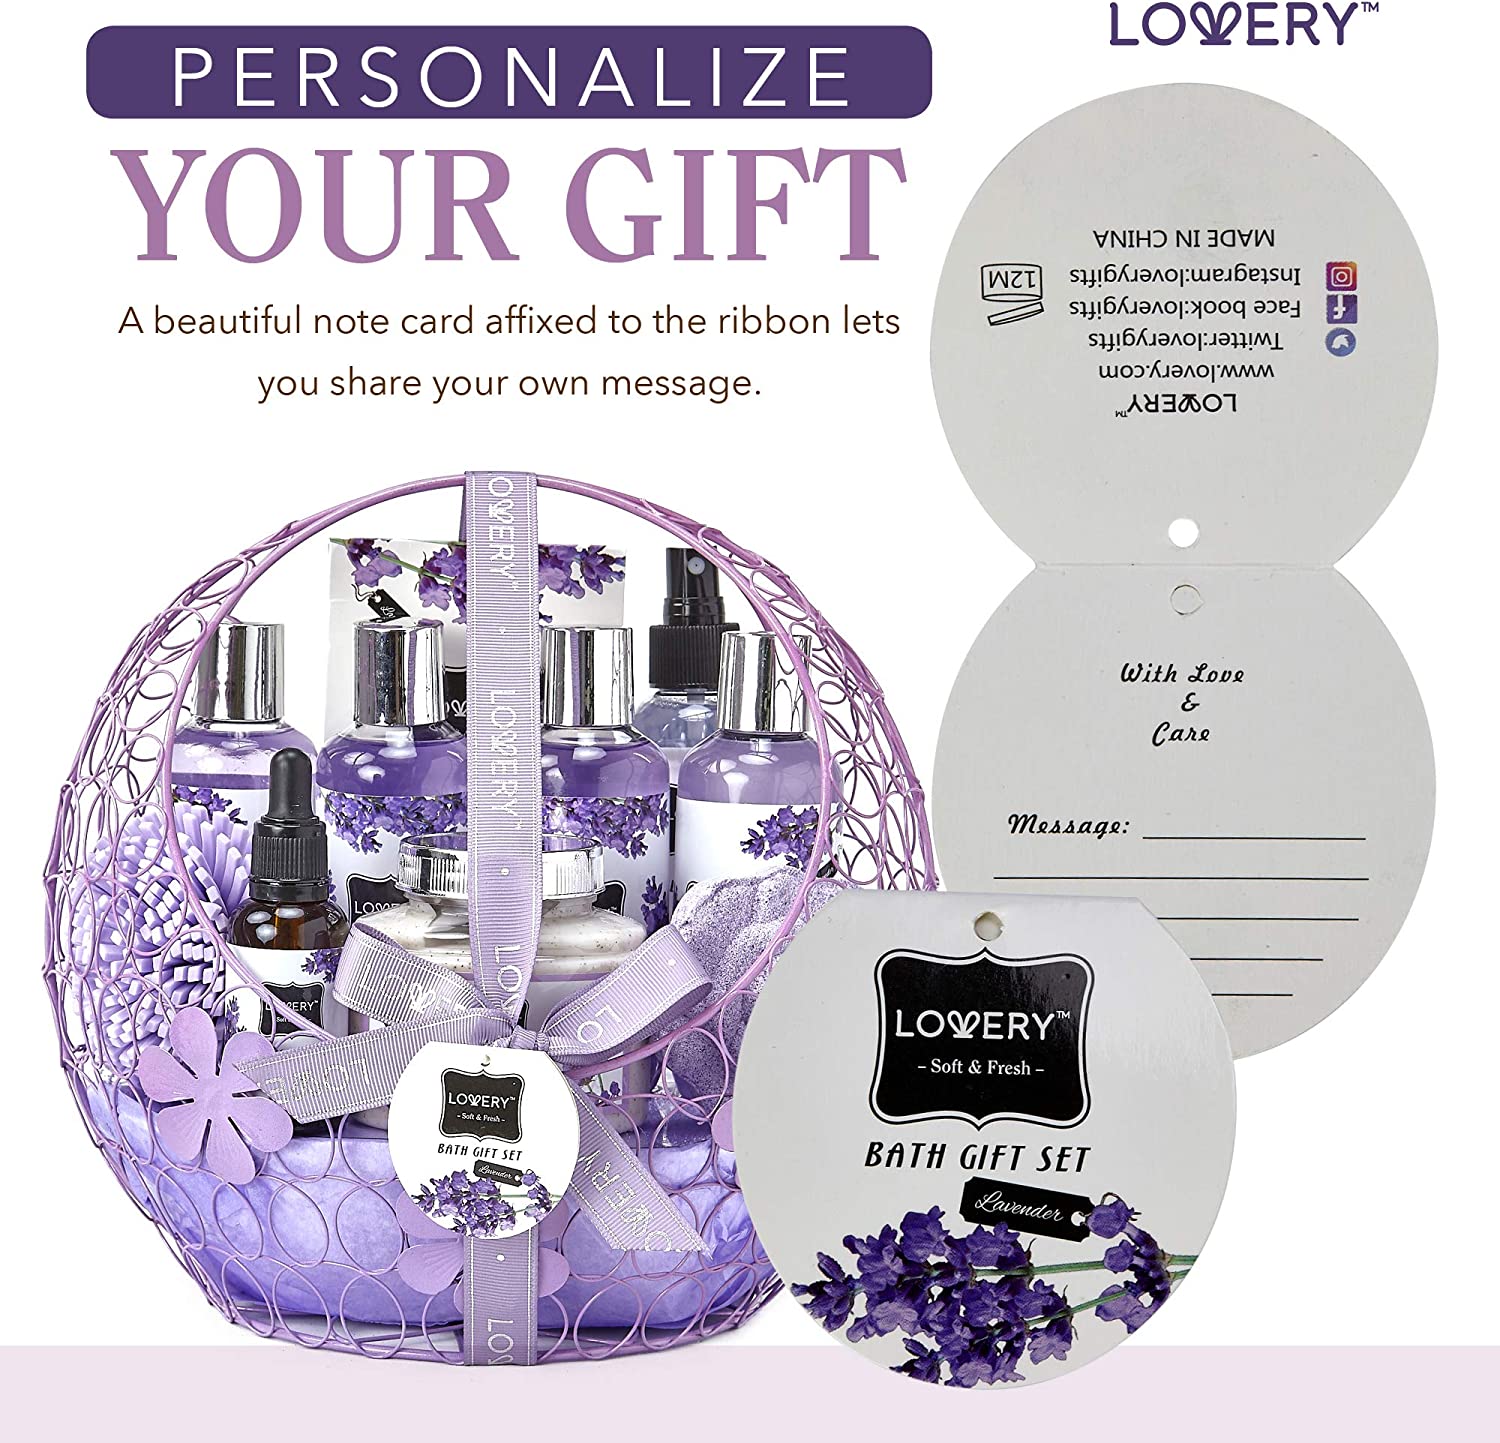 Lovery Lavender bath gift set, elegantly packaged body care essentials in purple and white, Luxurious Lavender & Silver Design, Soft & Fresh Aroma Products, Premium Bath Oil and Body Scrub, Decorative Lavender Ribbon Detailing, Exquisite Bathing Experience Enhancer, Ideal for Spa-Like Relaxation, Paraben-Free Bath Essentials, Cruelty-Free Body Care Selection, Presented in a Sophisticated Purple Mesh Basket with Lavender Accents